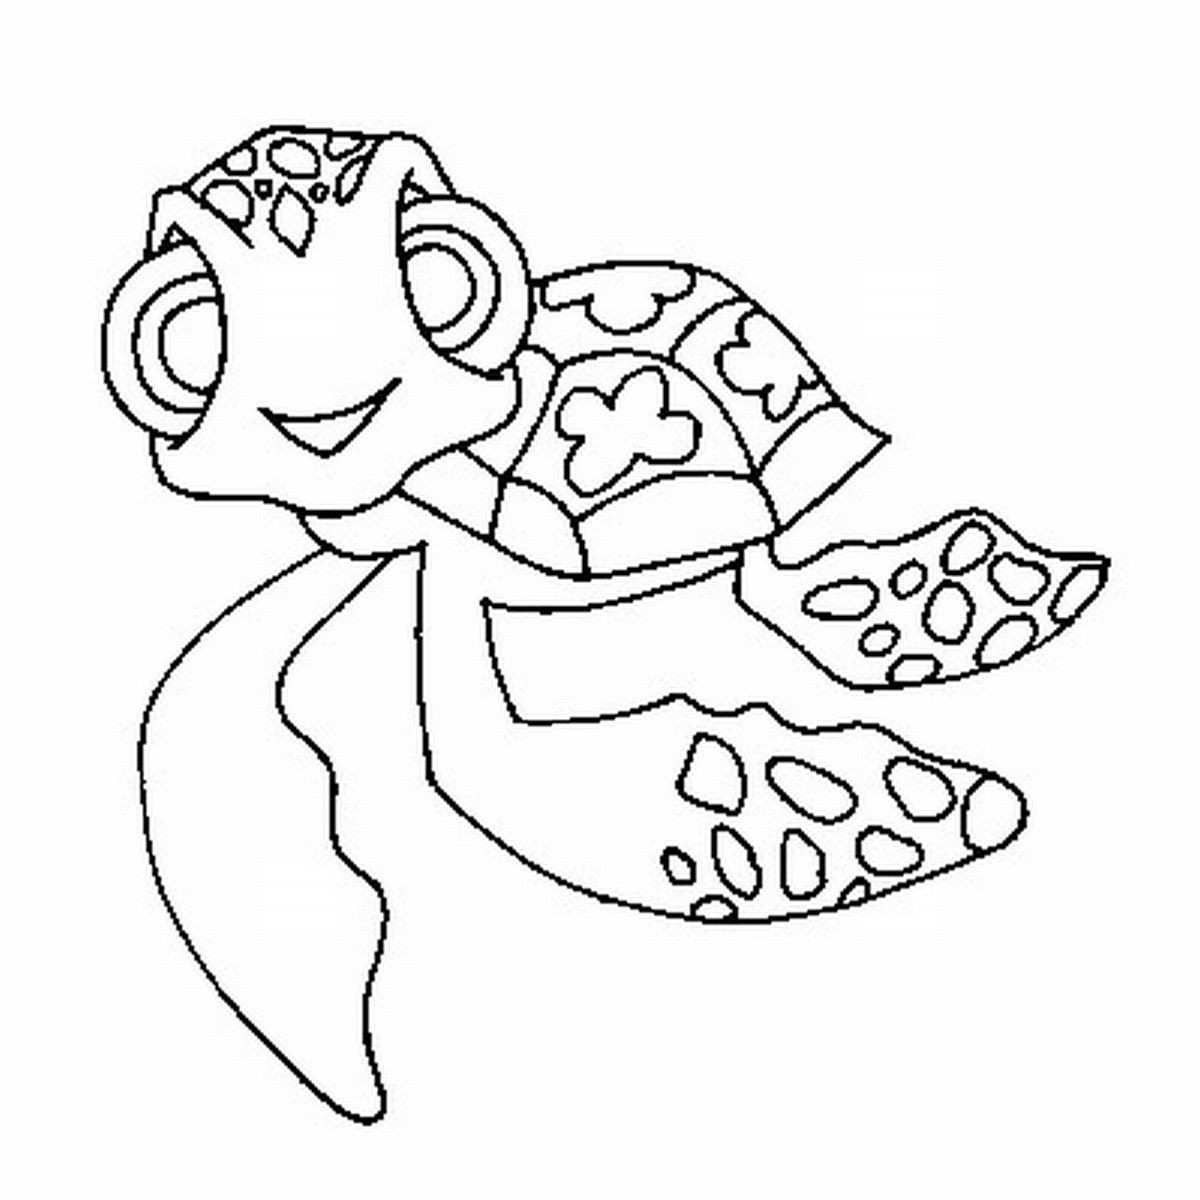 Baby Sea Turtle Coloring Pages
 Baby Sea Turtles Coloring Pages Coloring Home